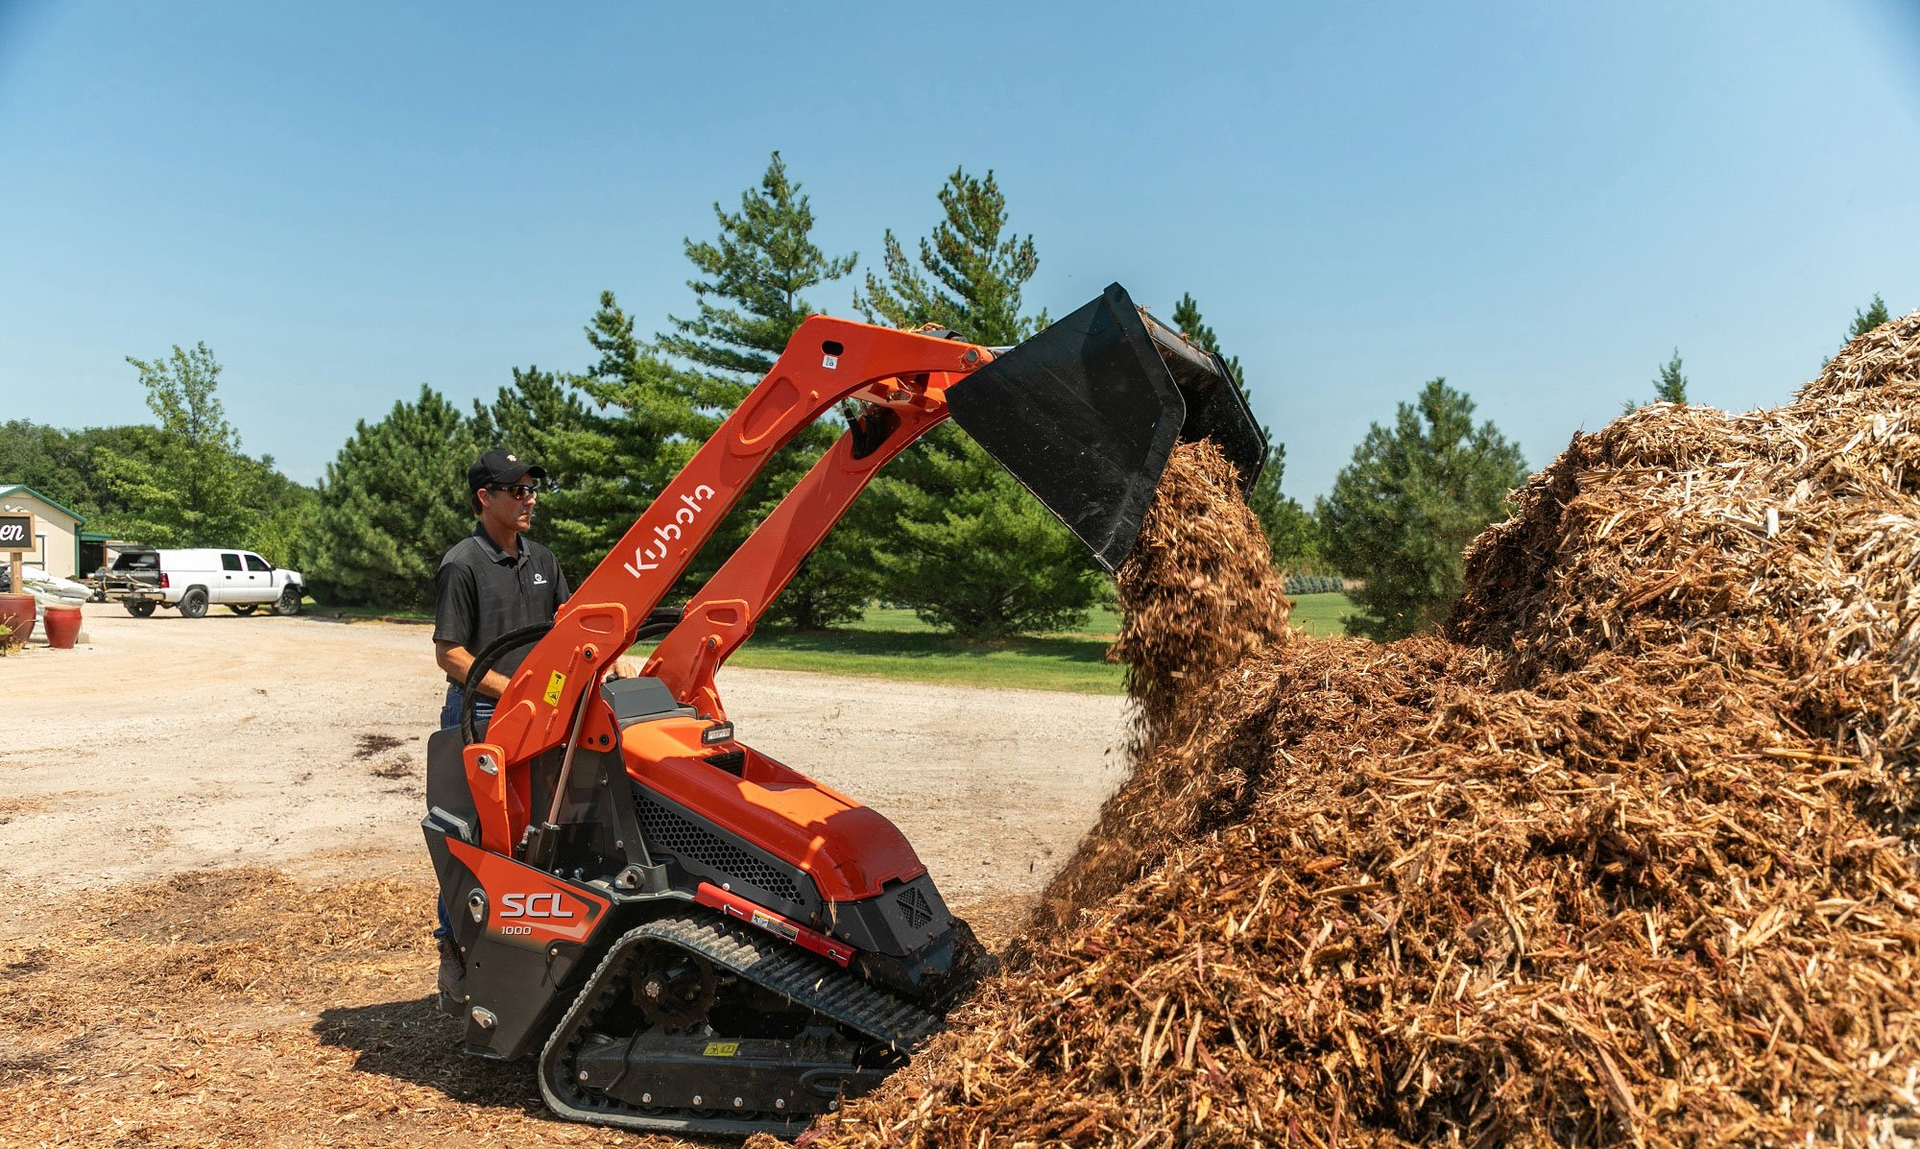 Kubota incorporated many design elements of its compact track loaders in developing its first CUL, the SCL1000. Controls are pilot operated. Standard features include keyless start with passcode protection, 12-volt charging port and a 4.3-inch LCD color dash monitor. Push-button control of auxiliary hydraulics is built into the loader control handle. Cushioned loader boom cylinders and an adjustable platform suspension system enhance operator comfort.